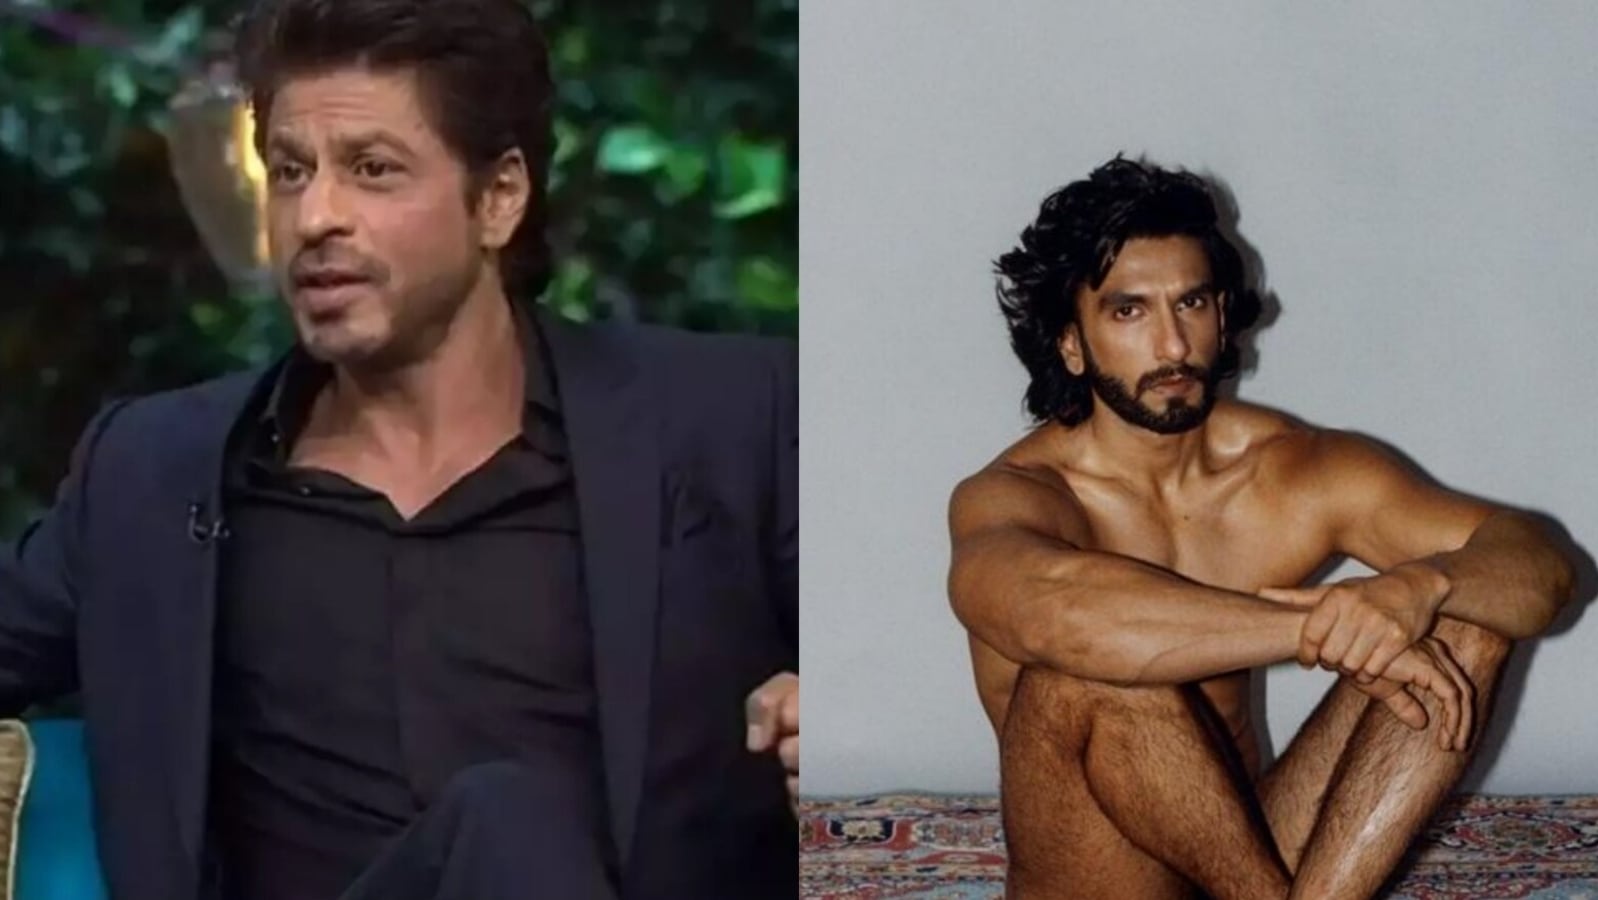 When Shah Rukh Khan said Ranveer Singh would get booked for not wearing  clothes | Bollywood - Hindustan Times